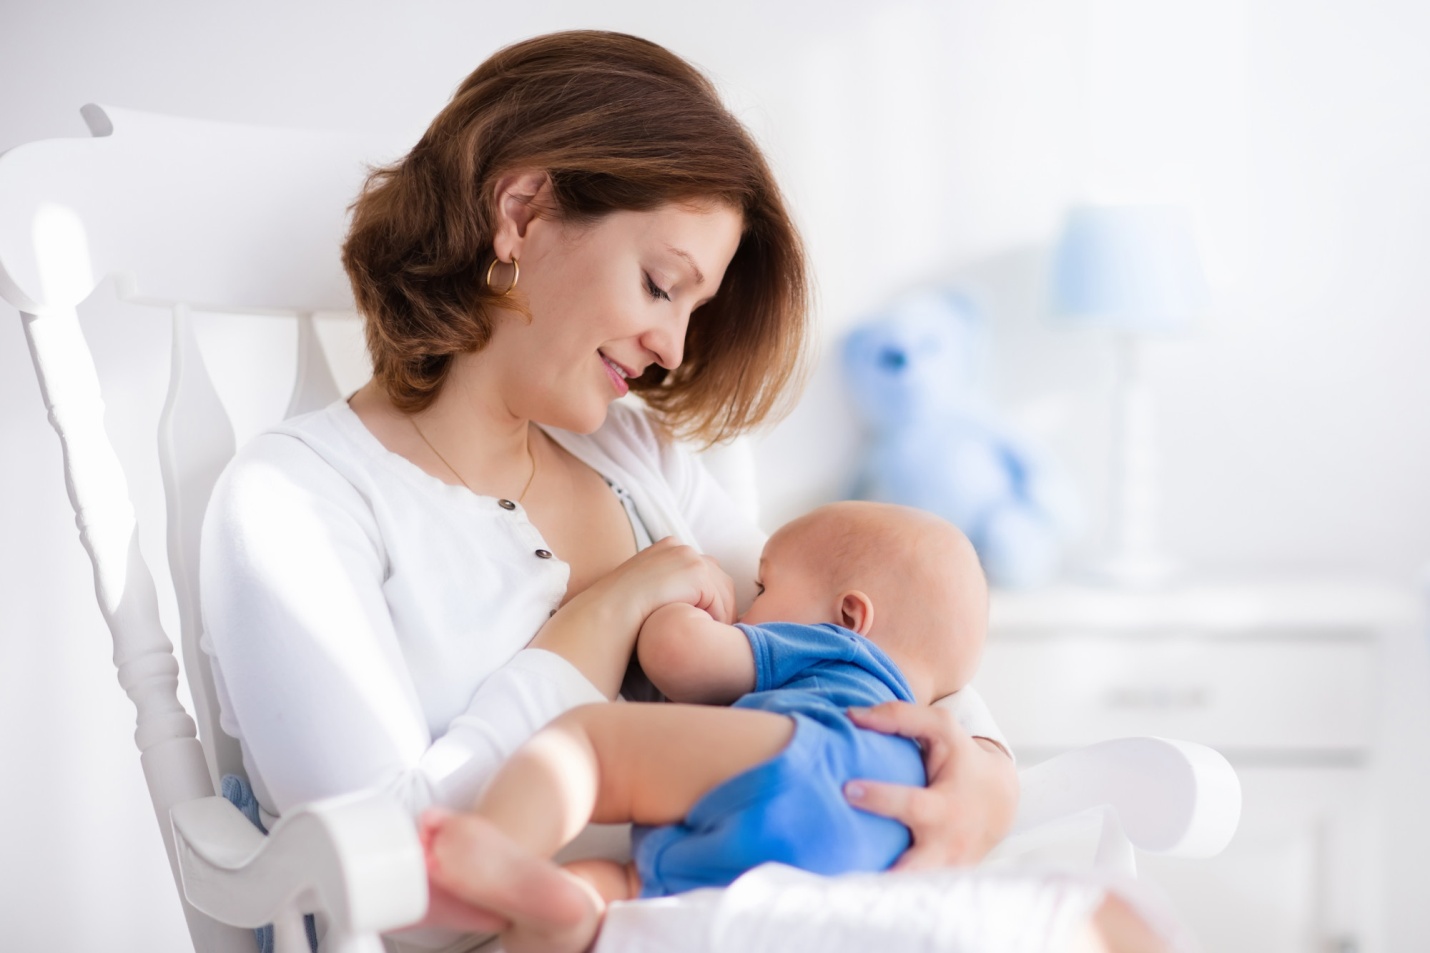 Dealing With Changes to Your Breasts After Breastfeeding Has Ended